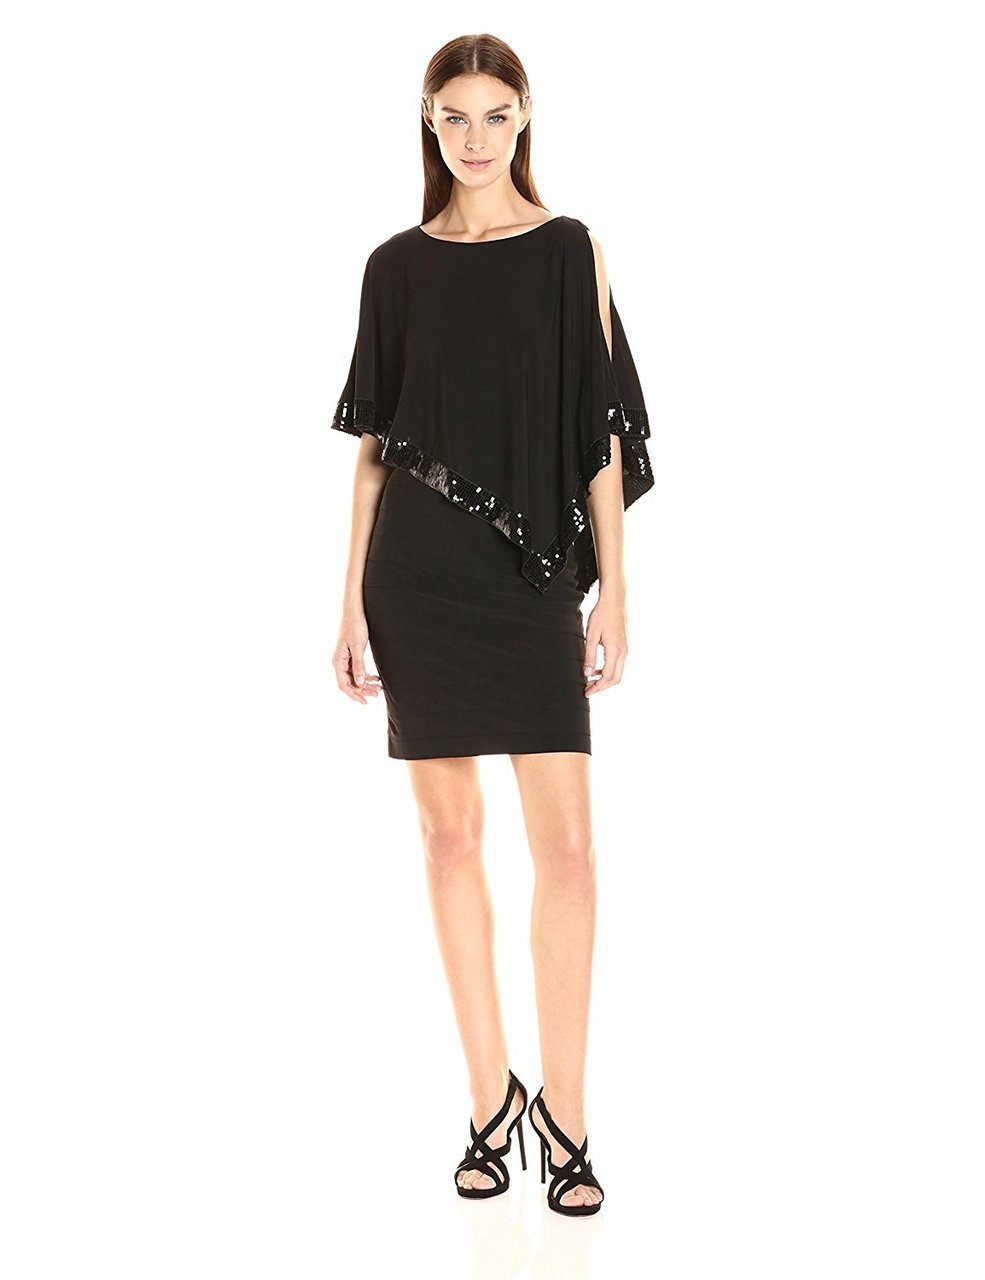 Adrianna Papell - Sequin-Trimmed Cutaway Capelet Dress in Black